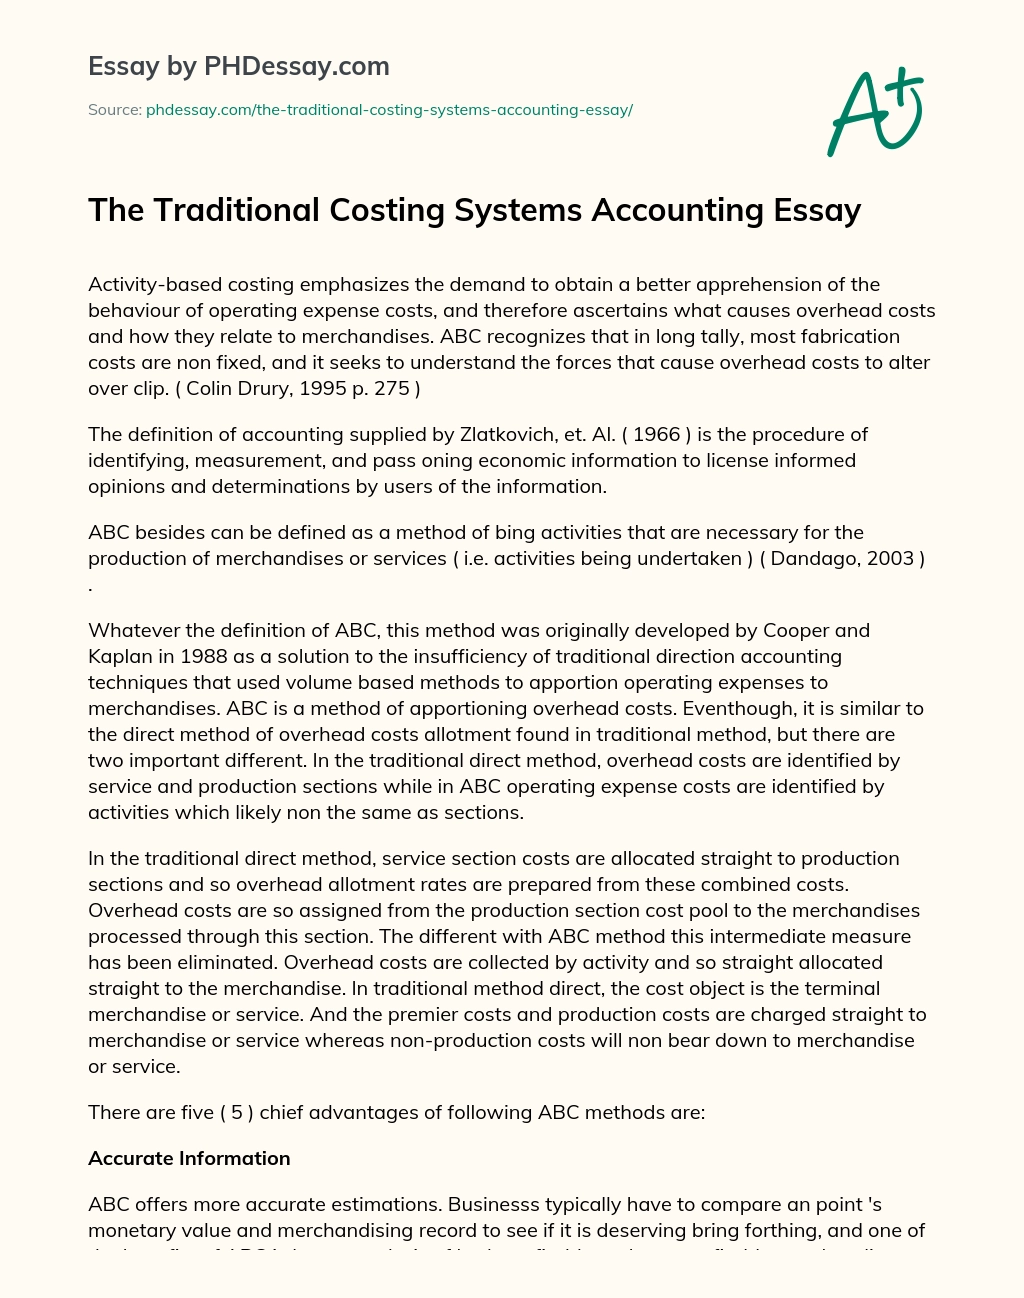 The Traditional Costing Systems Accounting Essay essay